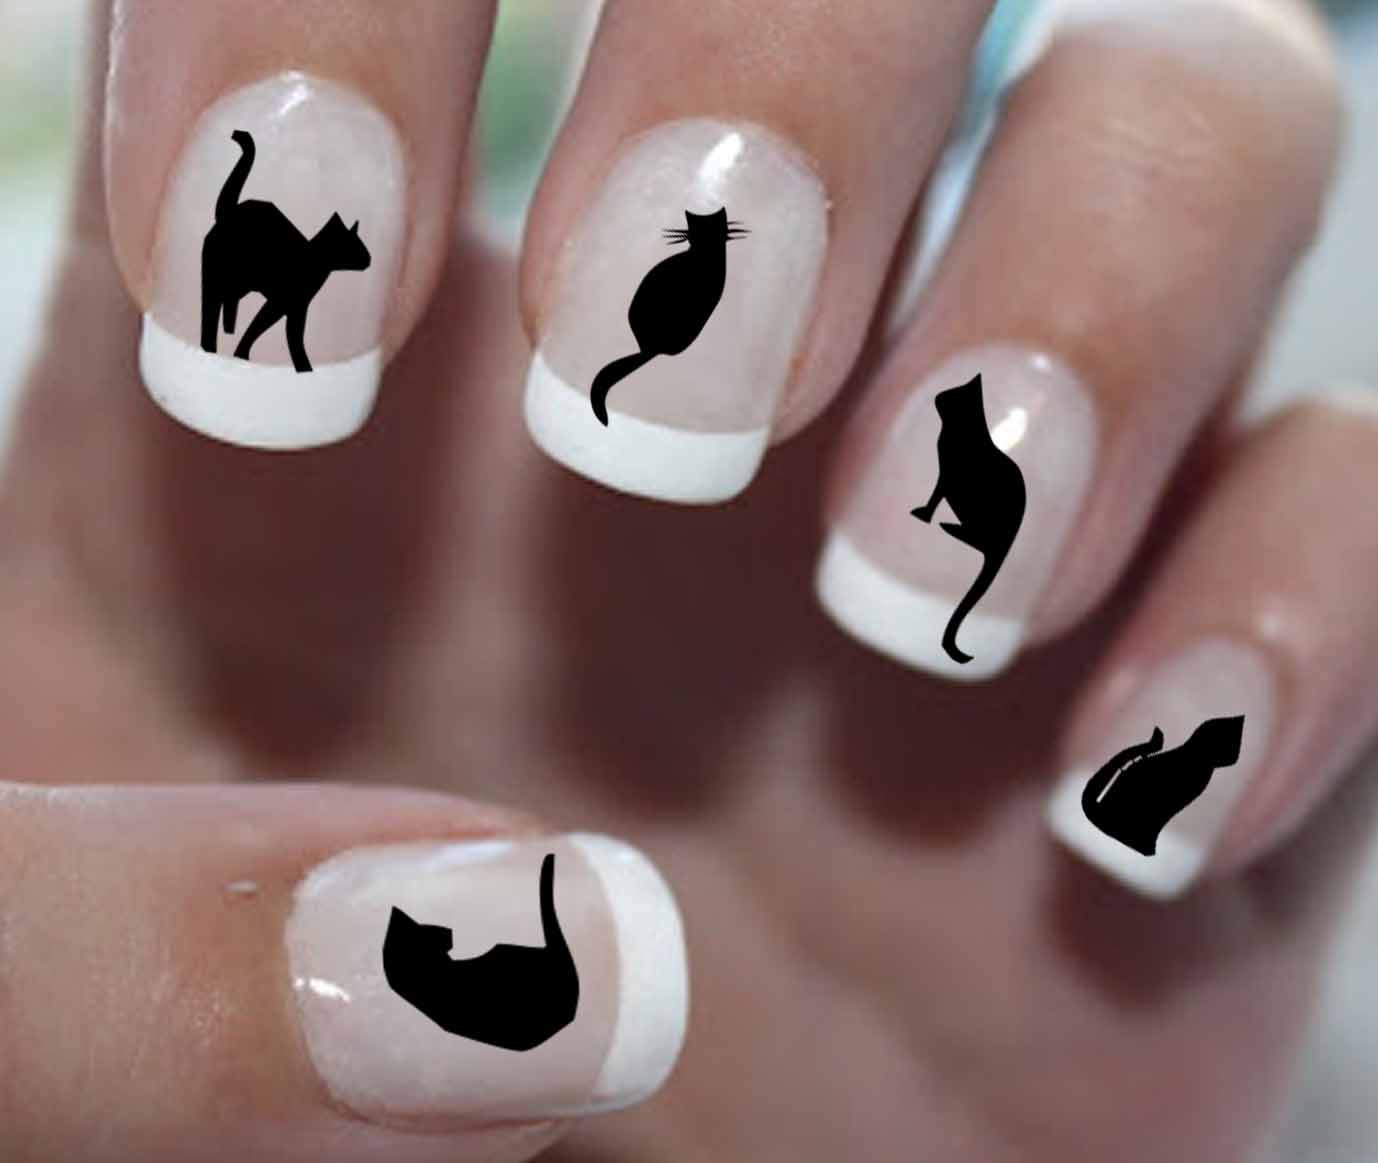 White Tip Nails With Black Cats Nail Art Design Idea